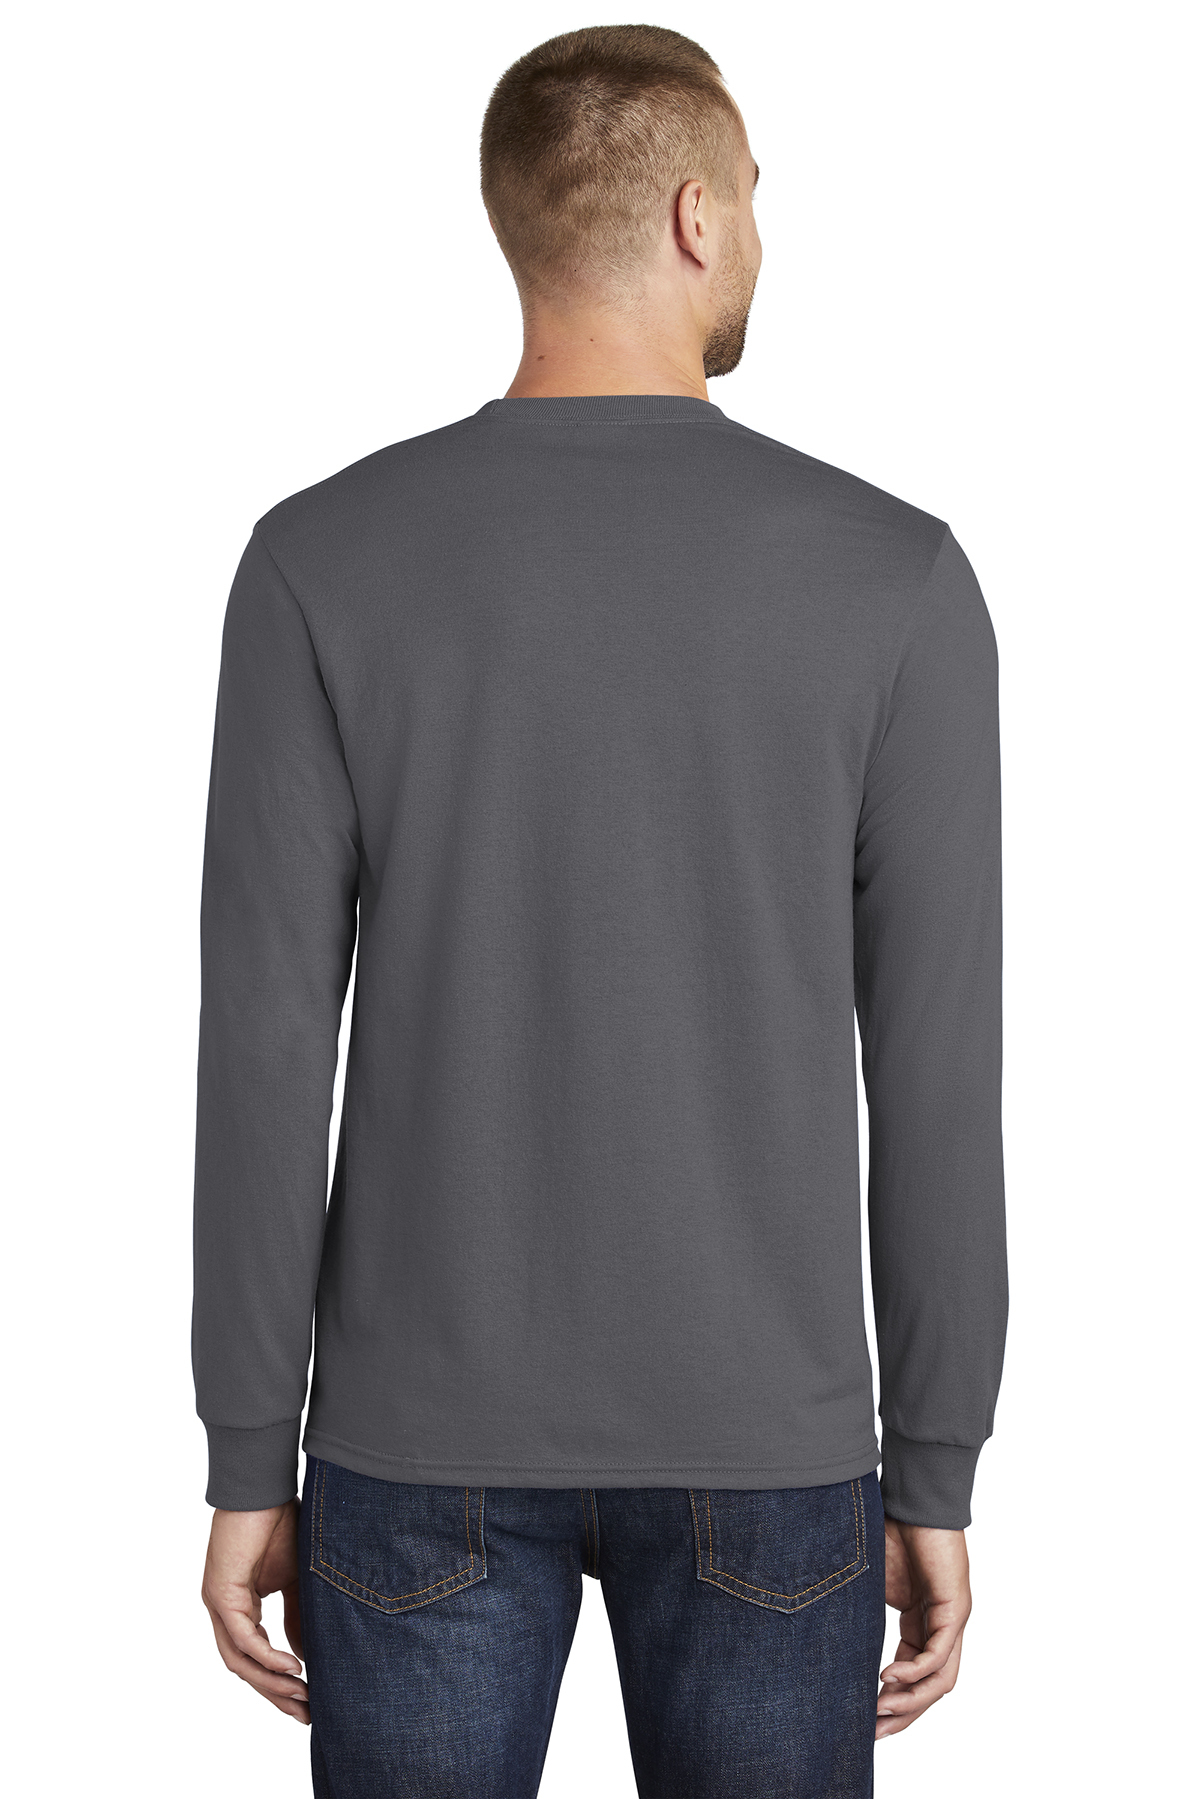 PC55LST Mens Port & Company® Tall Long Sleeve 50/50 Cotton/Poly T-Shirt